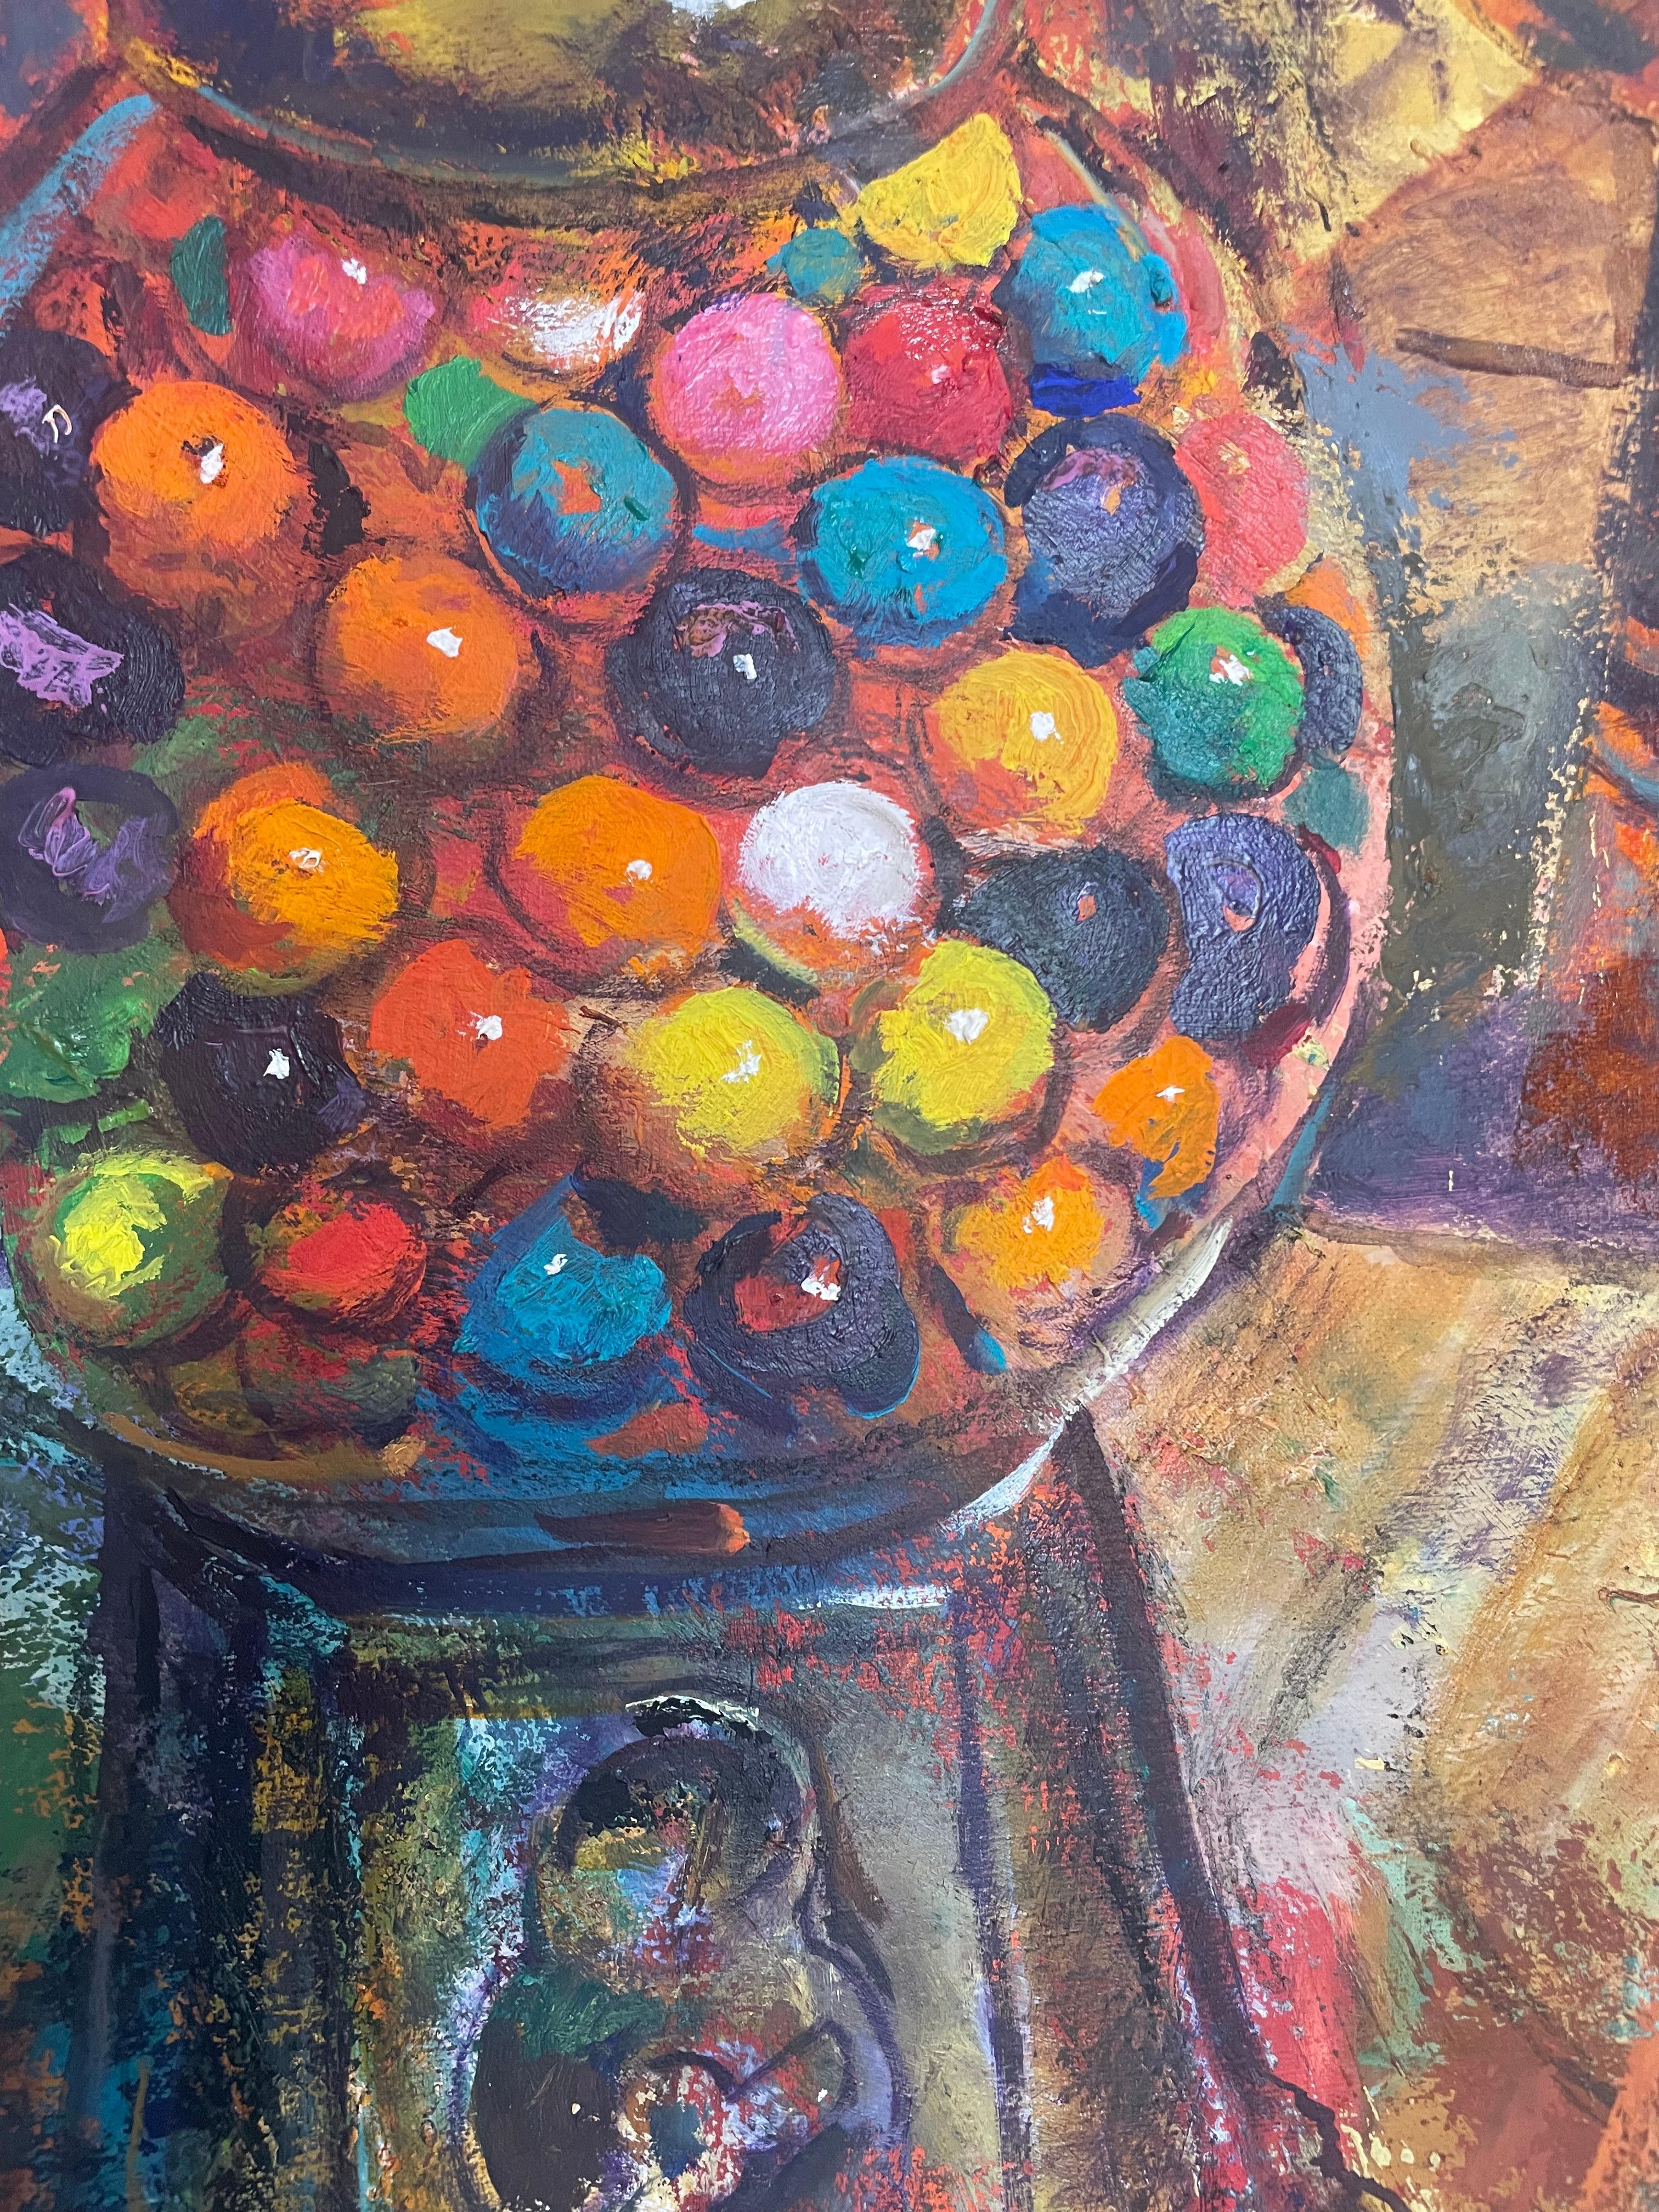 Gumball machine - Painting by Ronald Shap